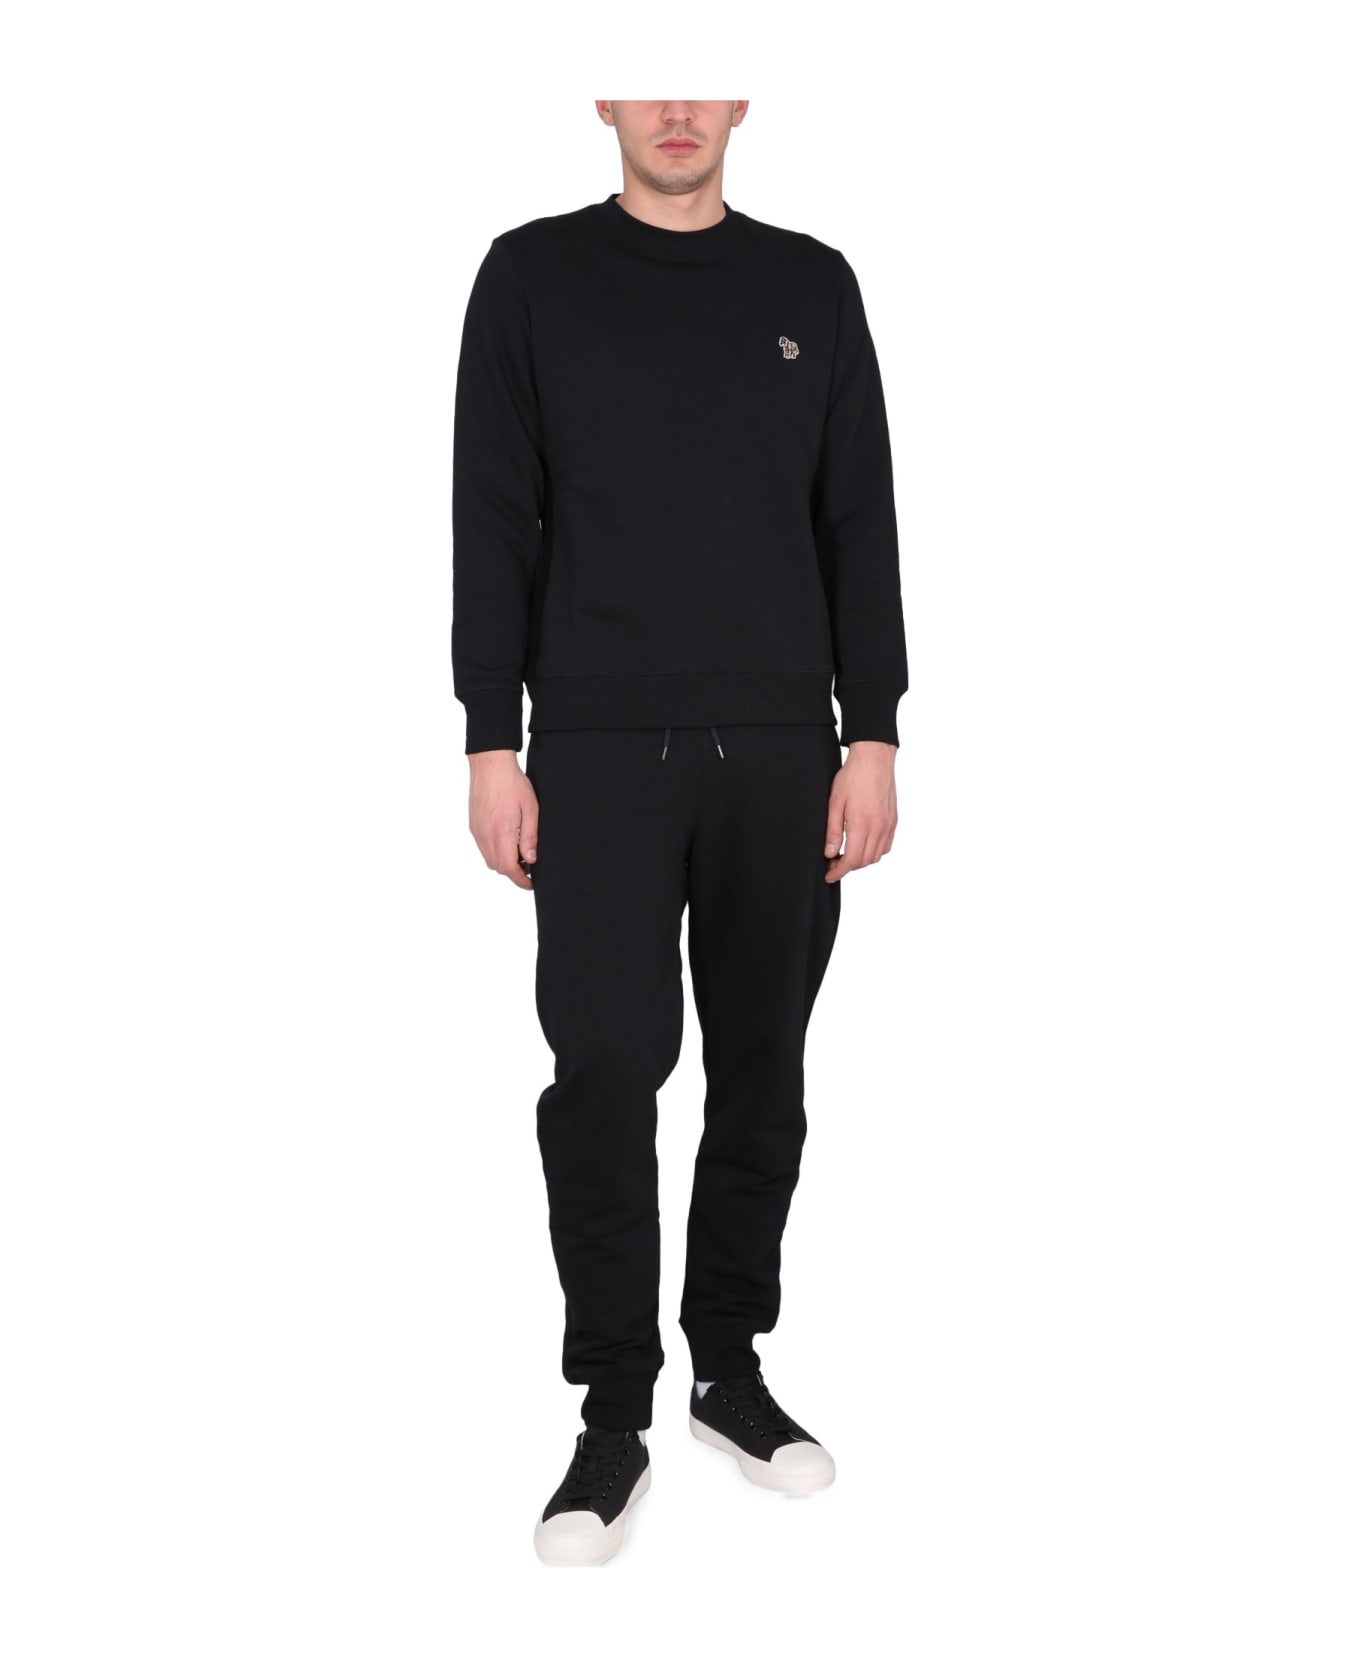 PS by Paul Smith Sweatshirt With Zebra Embroidery - Black フリース